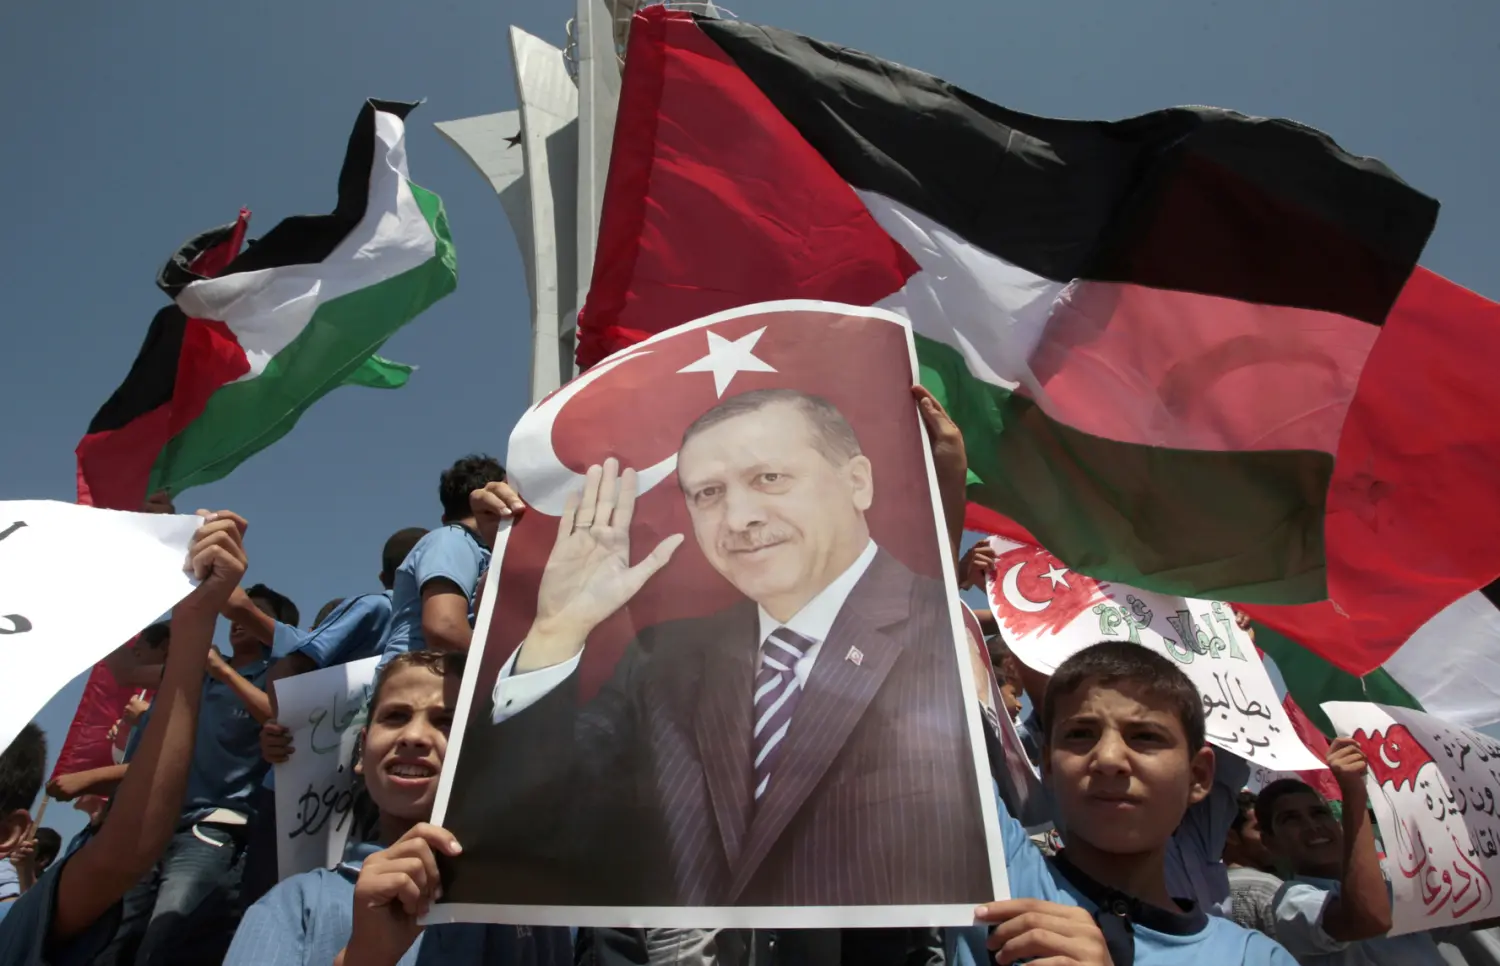 Palestinian schoolboys hold a poster depicting Turkey's Prime Minister Recep Tayyip Erdoğan during a rally at Gaza Seaport calling on Erdoğan to visit the Gaza Strip. September 13, 2011. REUTERS/Ismail Zaydah